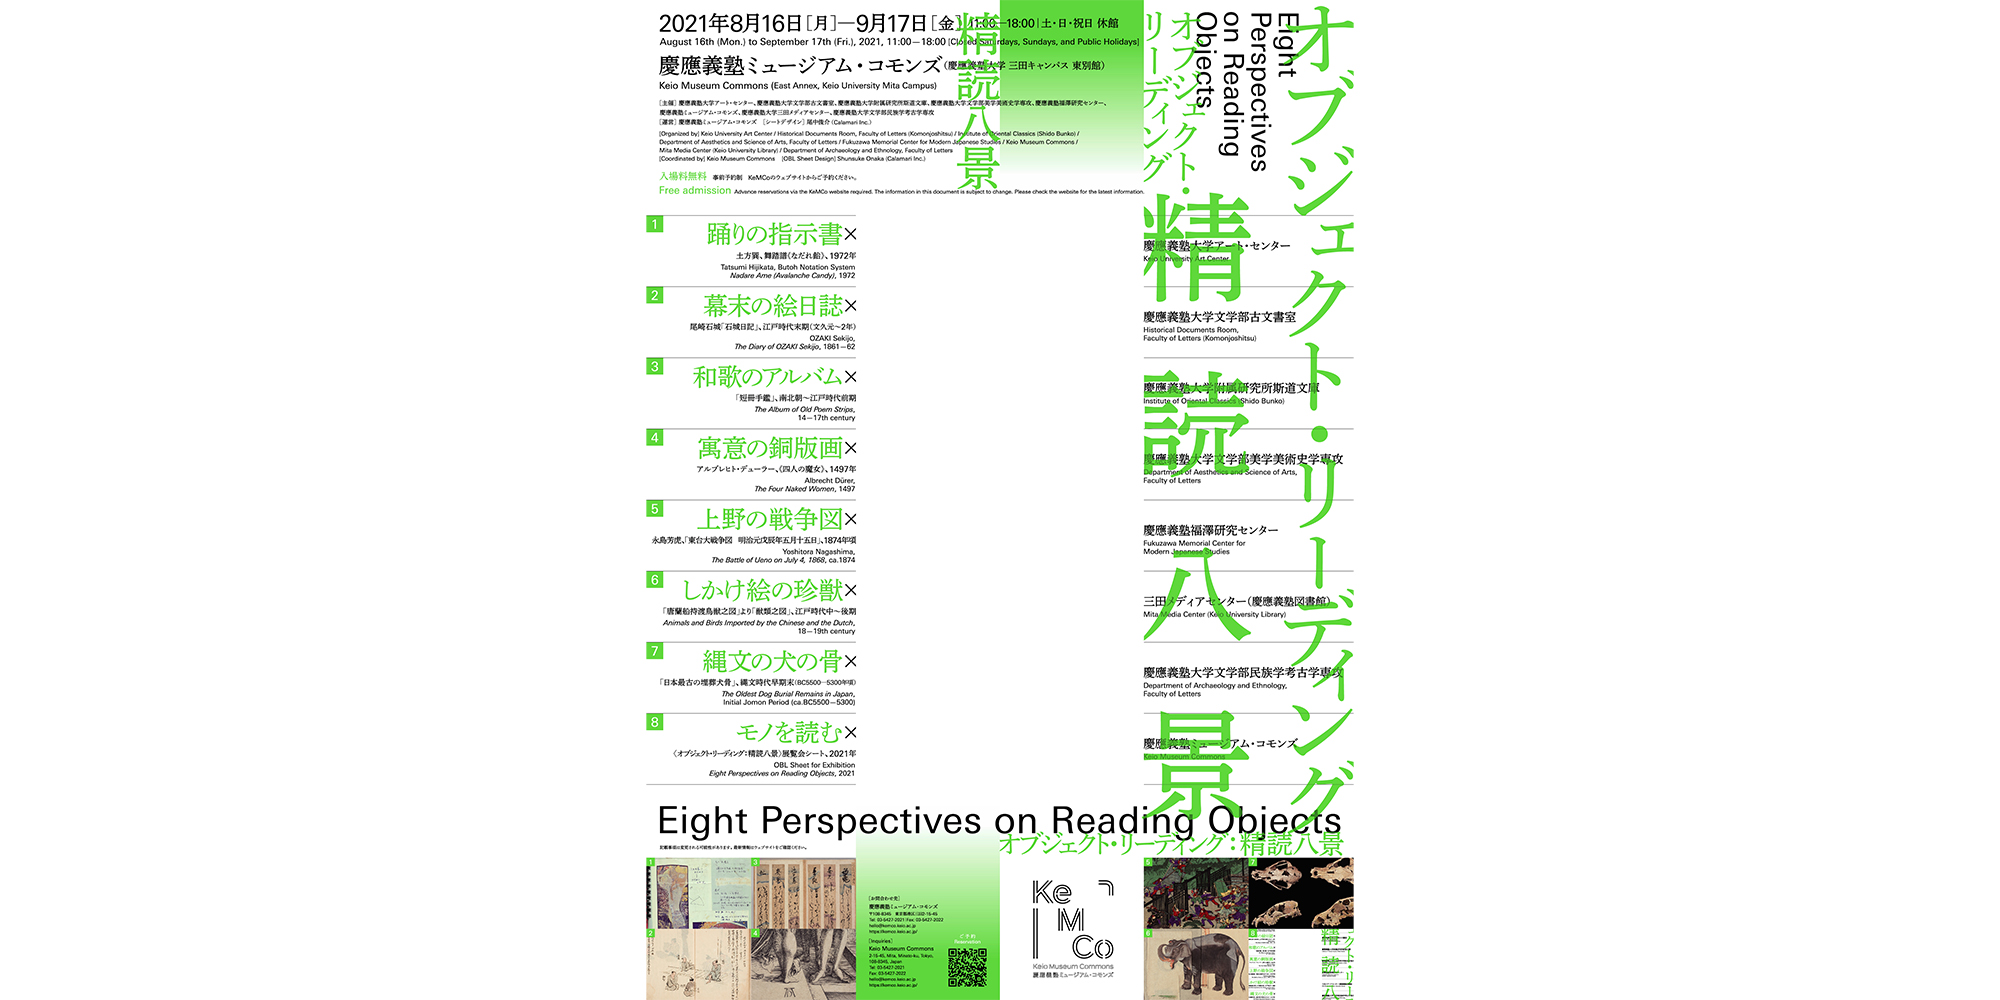 Eight Perspectives on Reading Objects